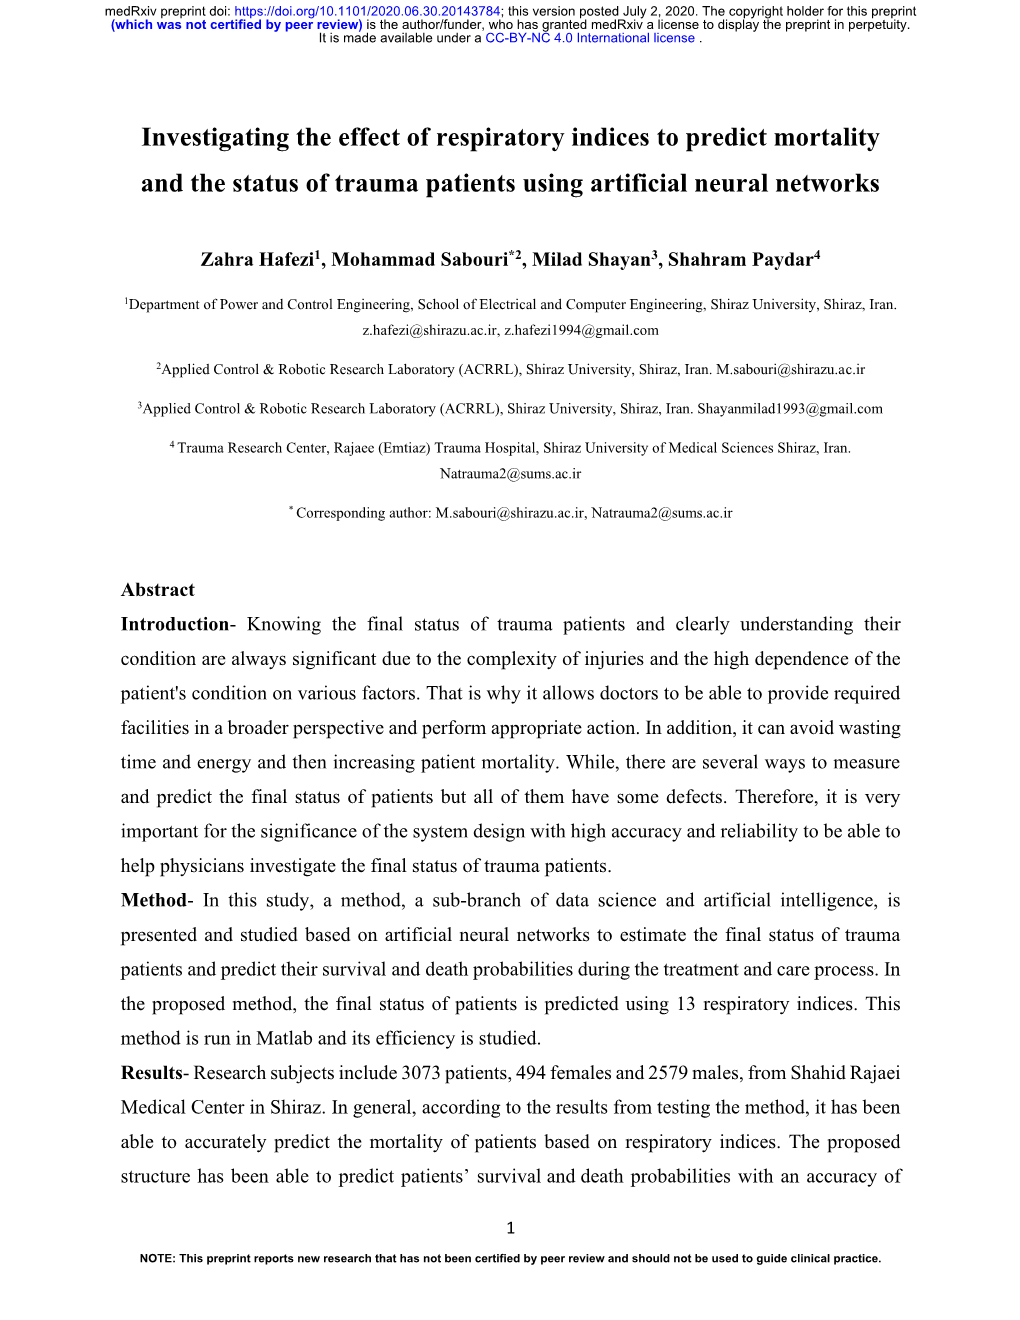 Investigating the Effect of Respiratory Indices to Predict Mortality and the Status of Trauma Patients Using Artificial Neural Networks